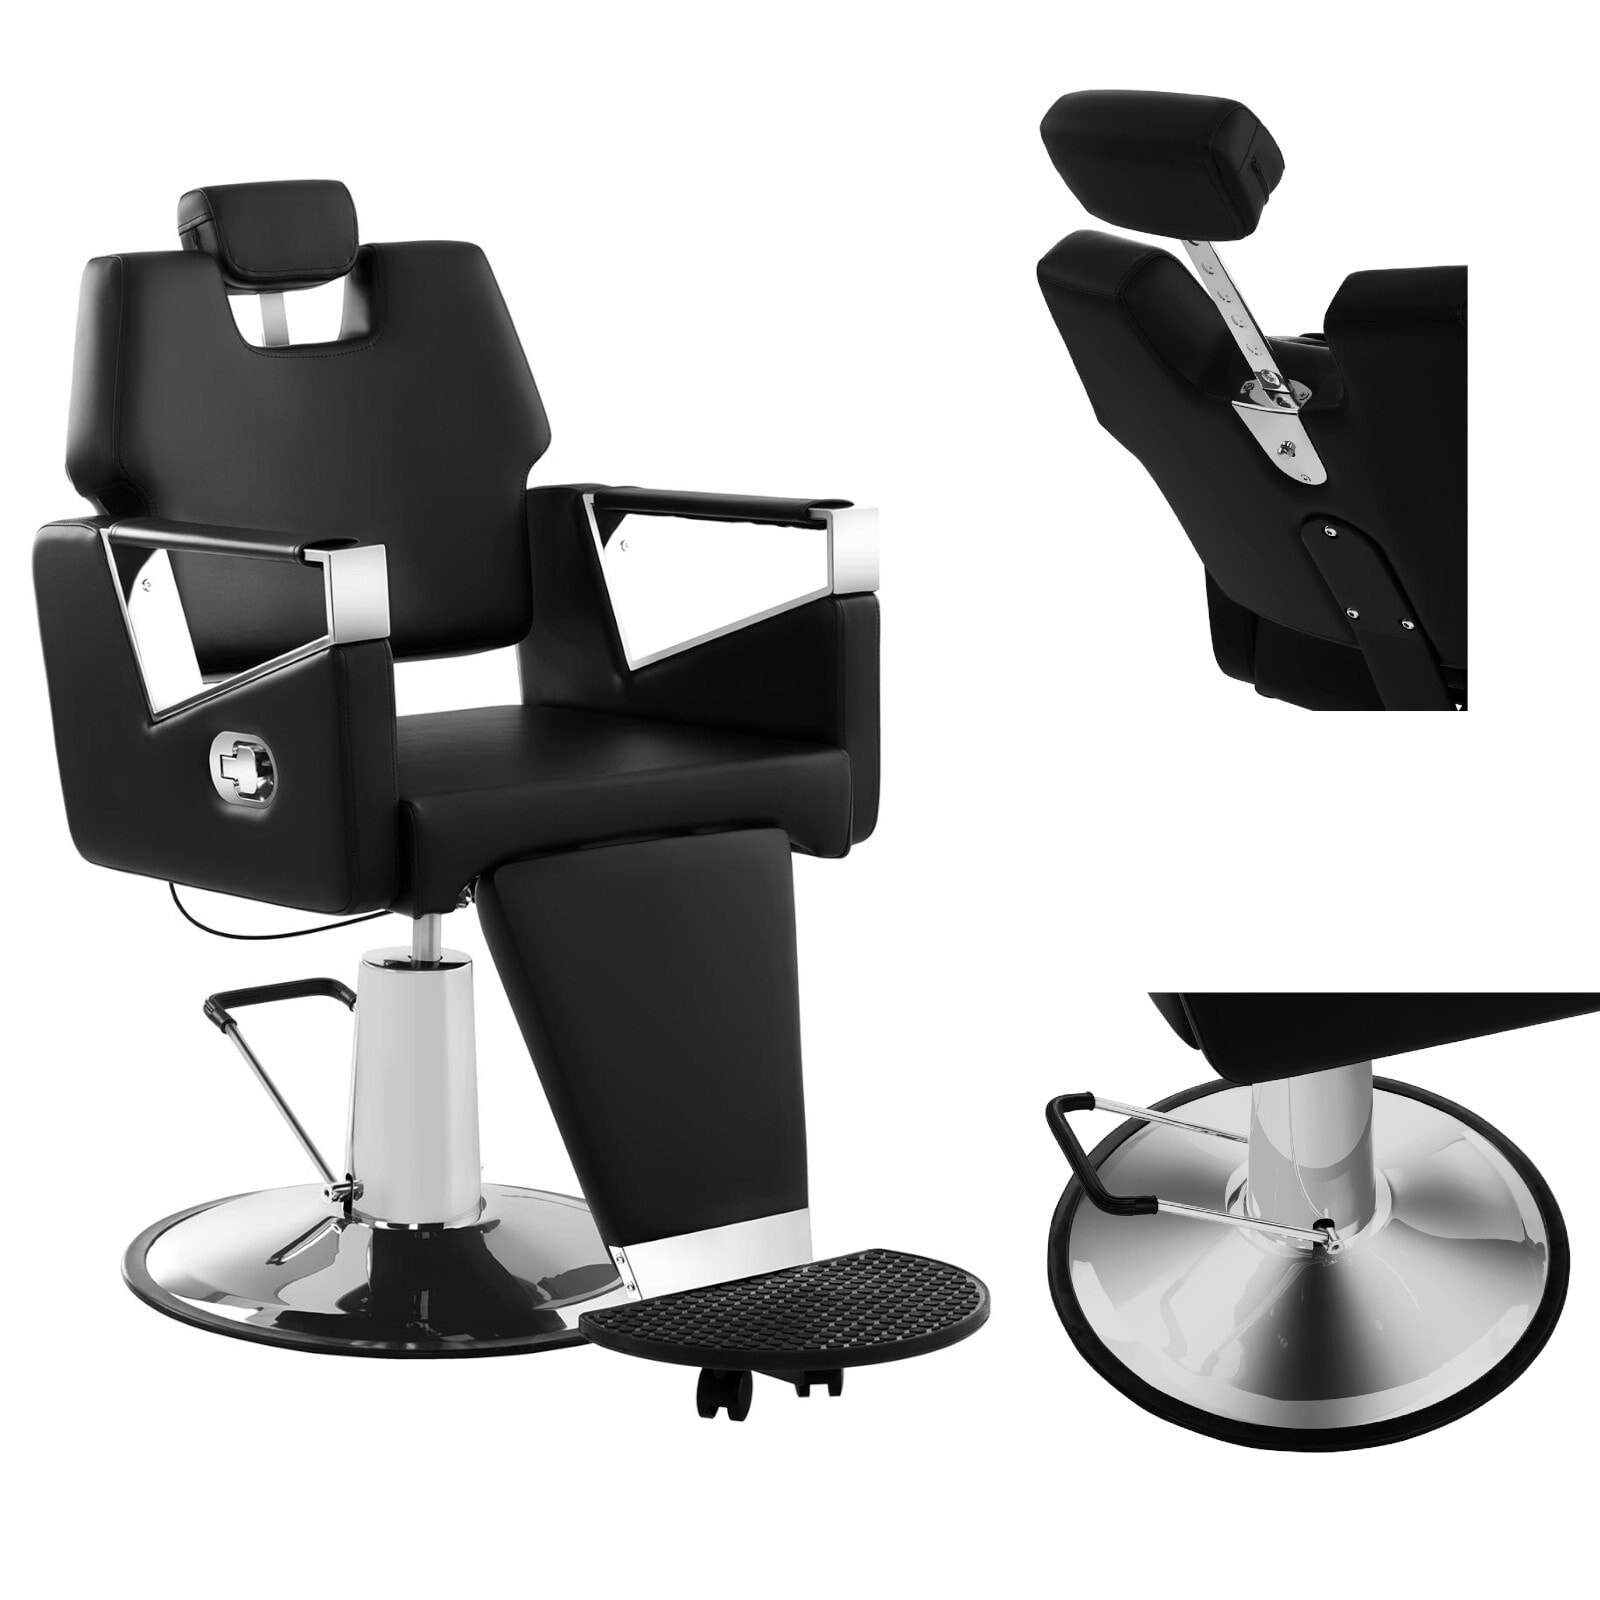 Professional barber chair with a rotating footrest TURIN Physa black